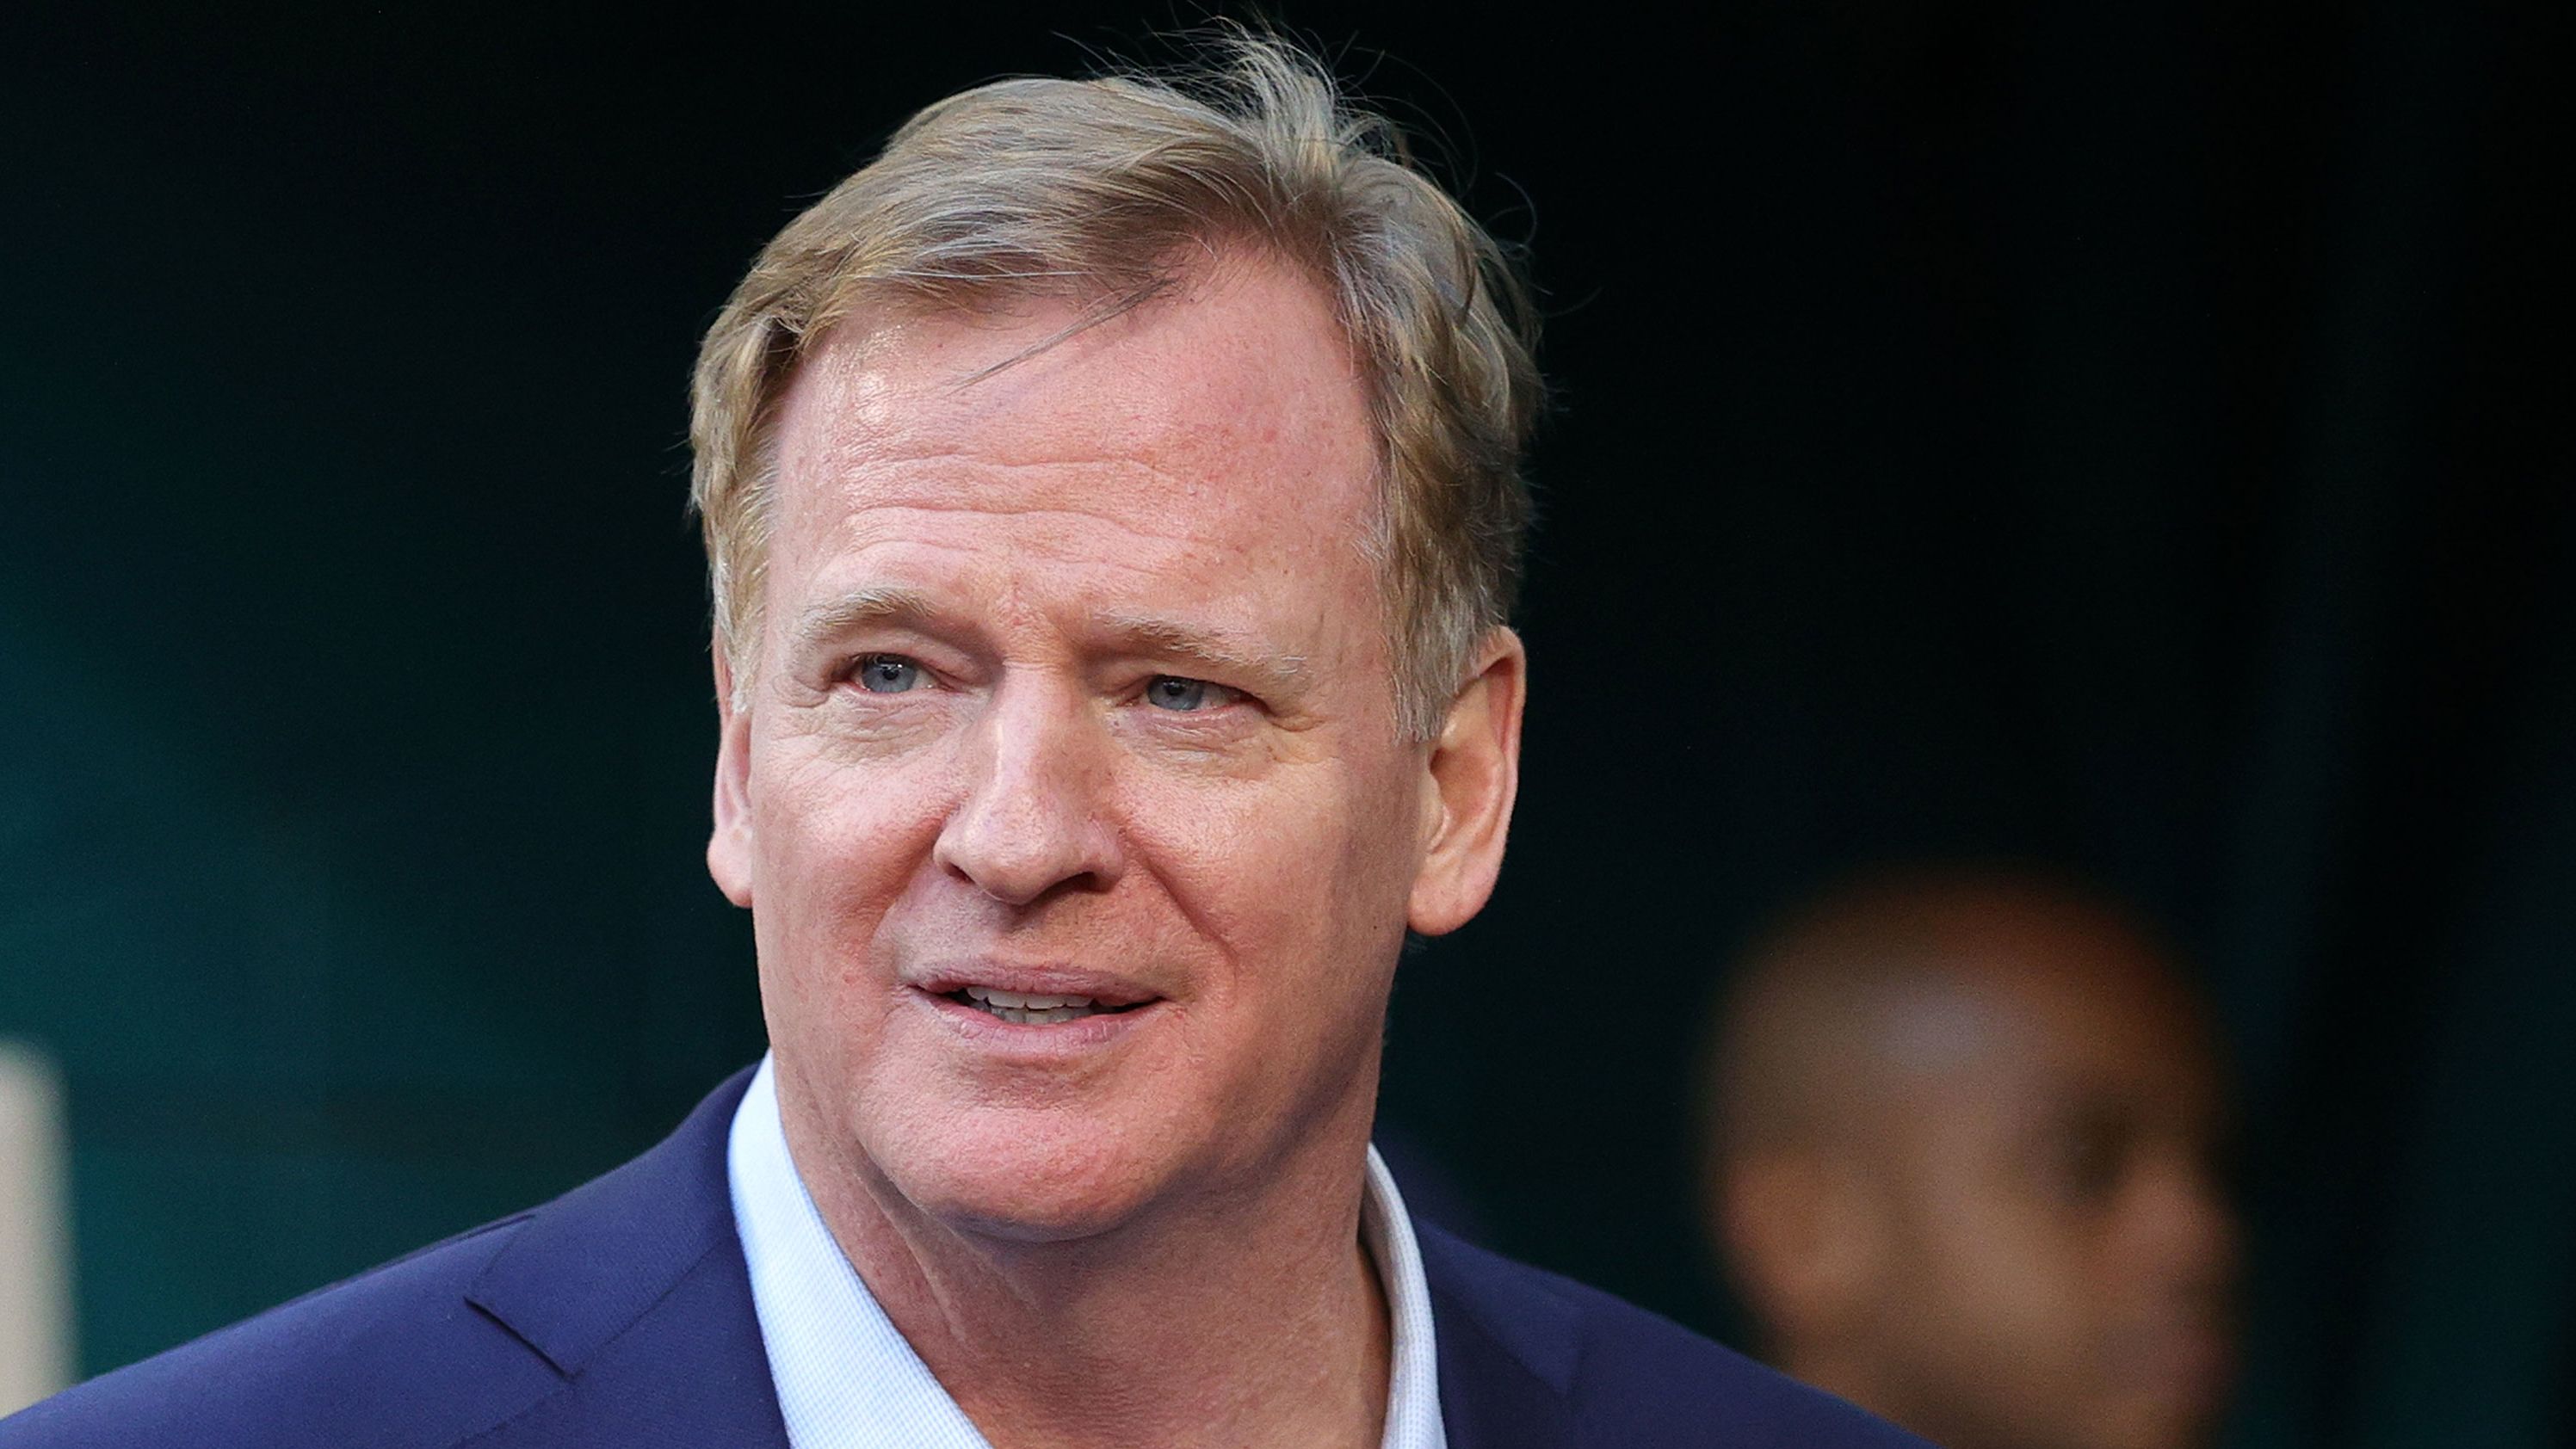 NFL Commissioner Roger Goodell says the league's intent "is to hold as many fans at the Super Bowl that can be done safely."